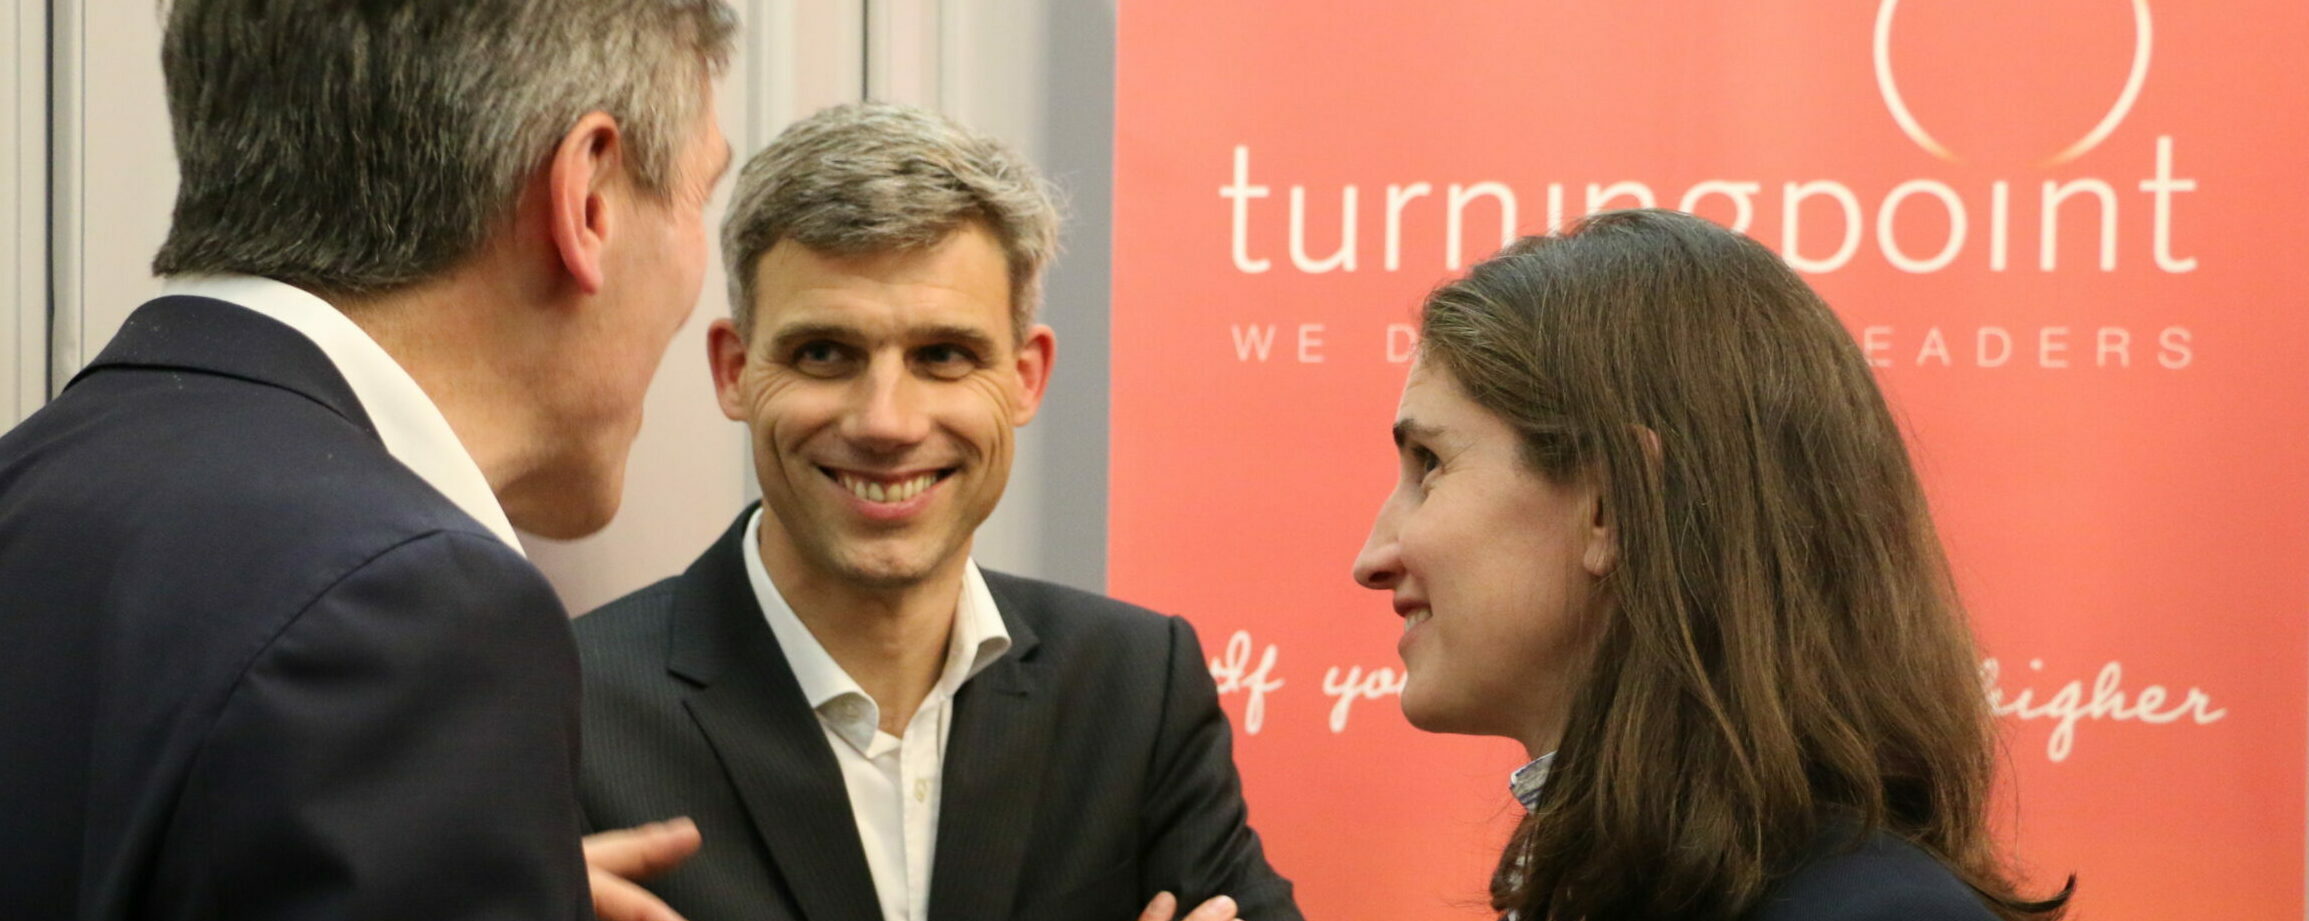 Creation of Turningpoint Switzerland, arrival of Eric de Courville, Partner